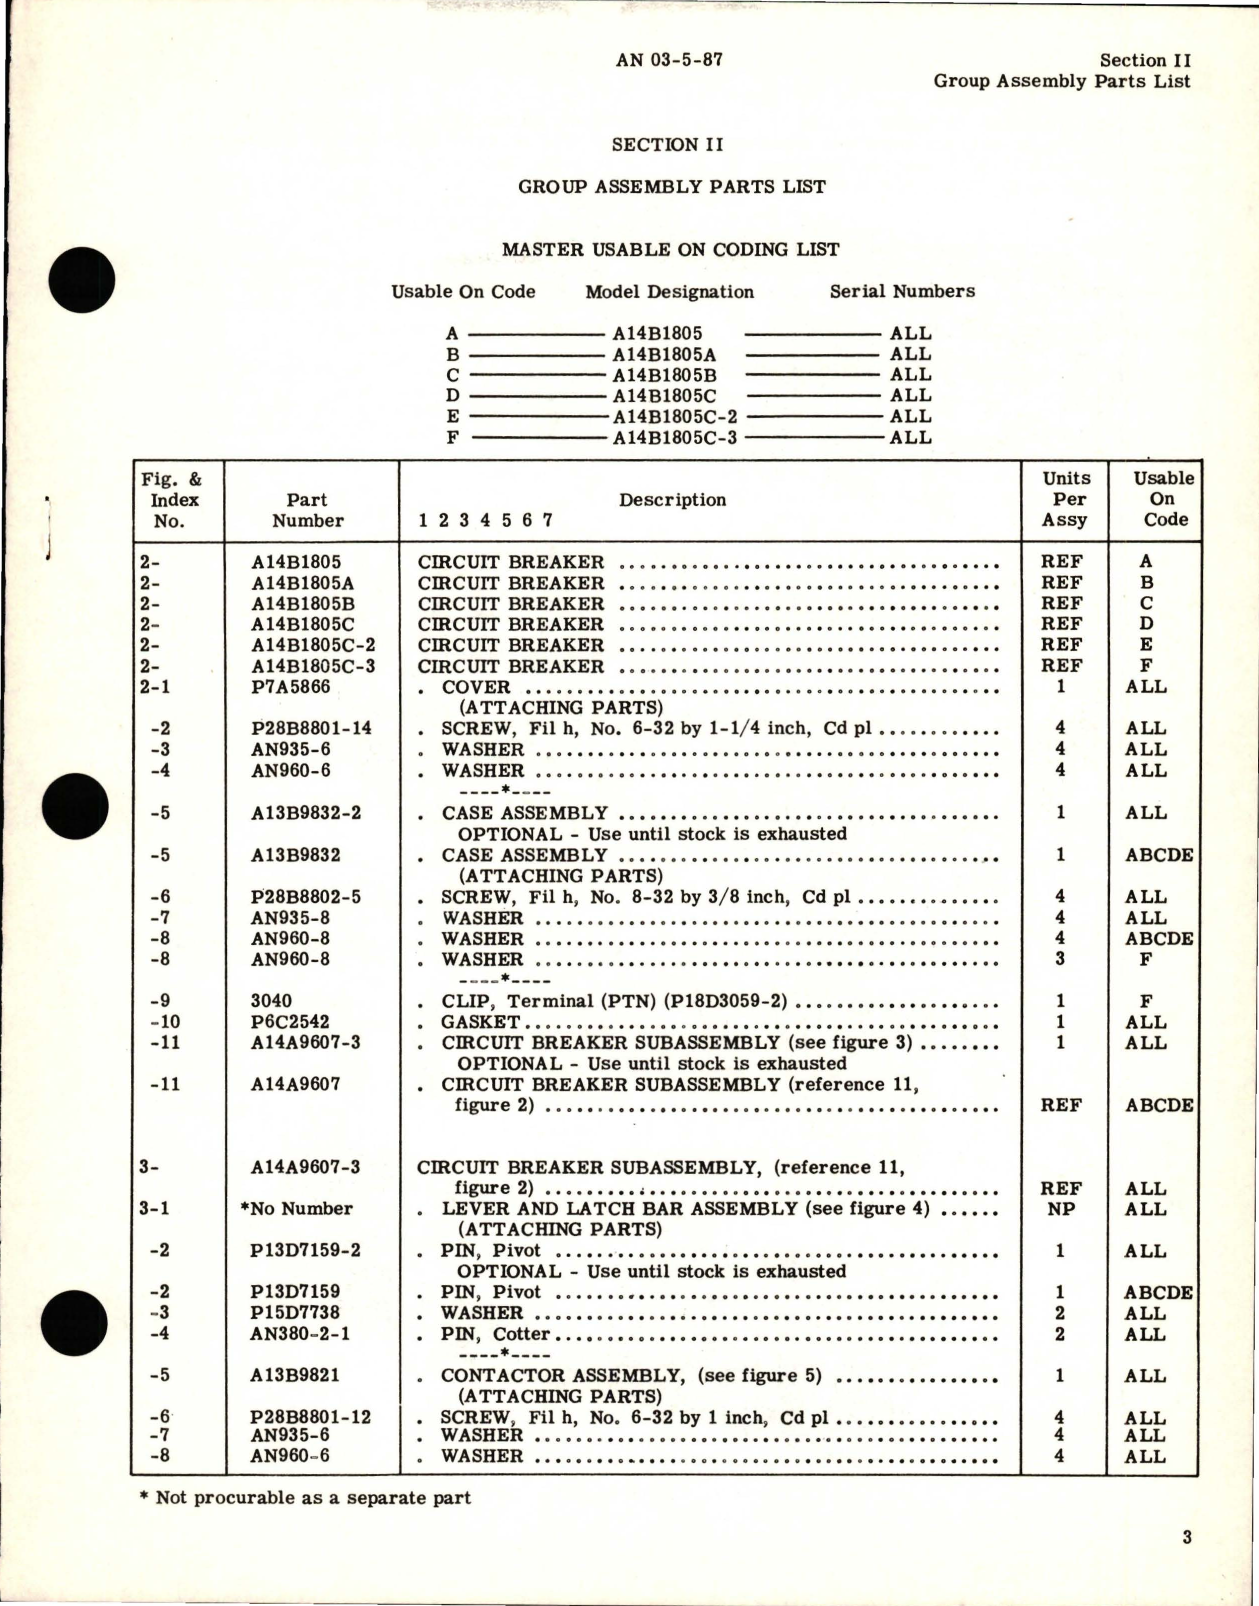 Sample page 5 from AirCorps Library document: Illustrated Parts Breakdown for Circuit Breaker  - Parts A14B1805, A14B1805A, A14B1805B, A14B1805C, A14B1805C-2, and A14B1805C-3